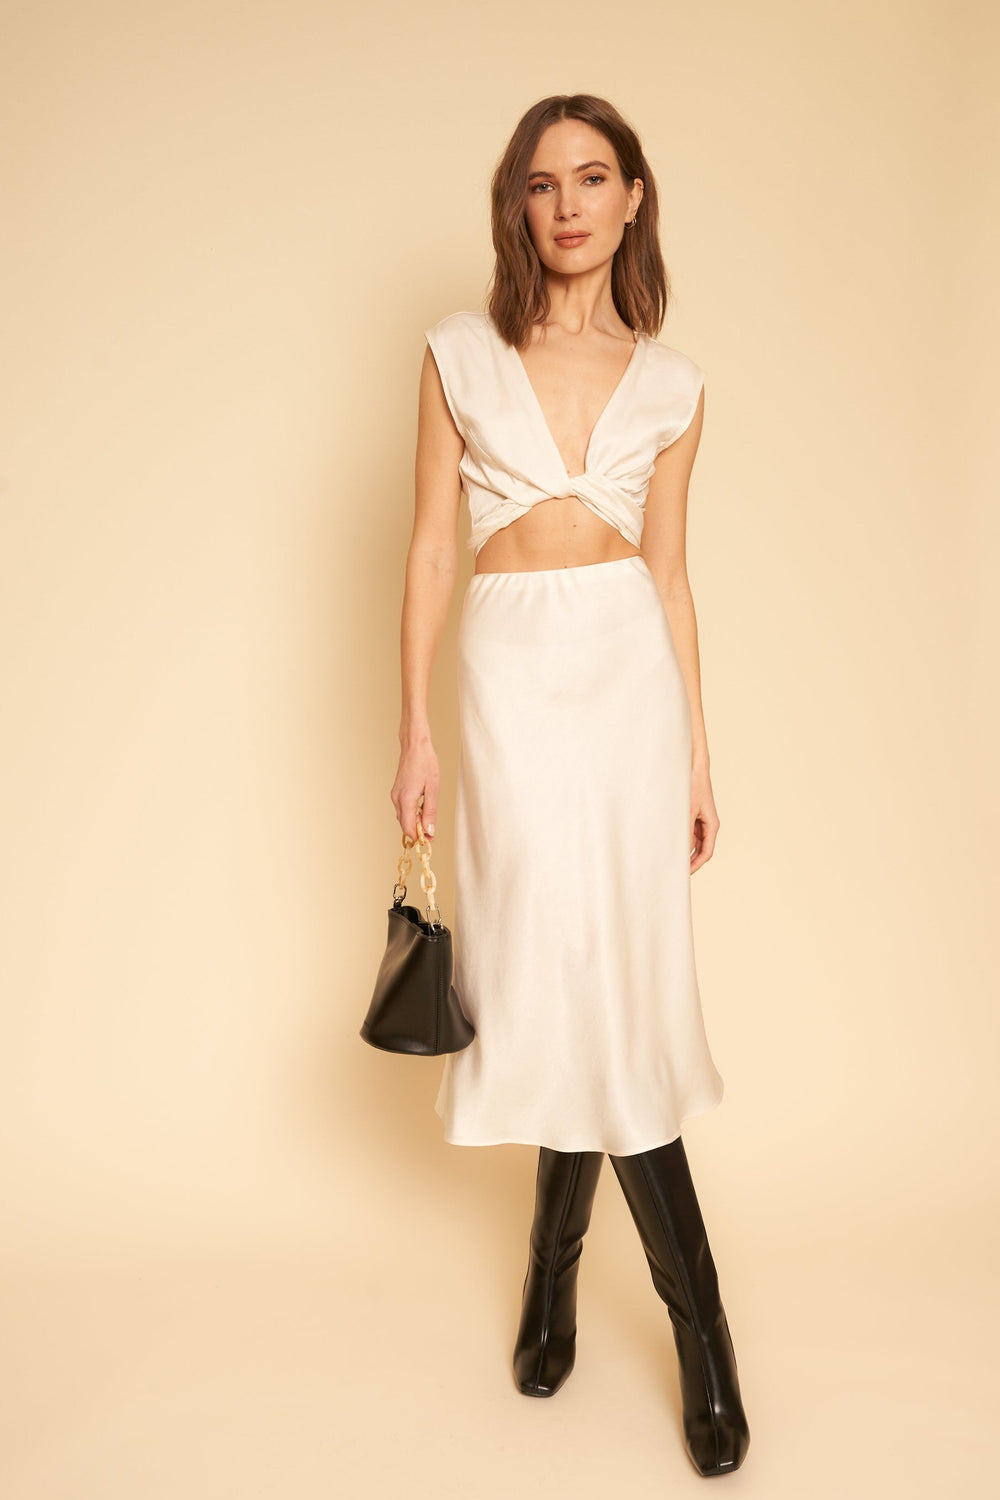 Donna Skirt in Cream - Whimsy & Row